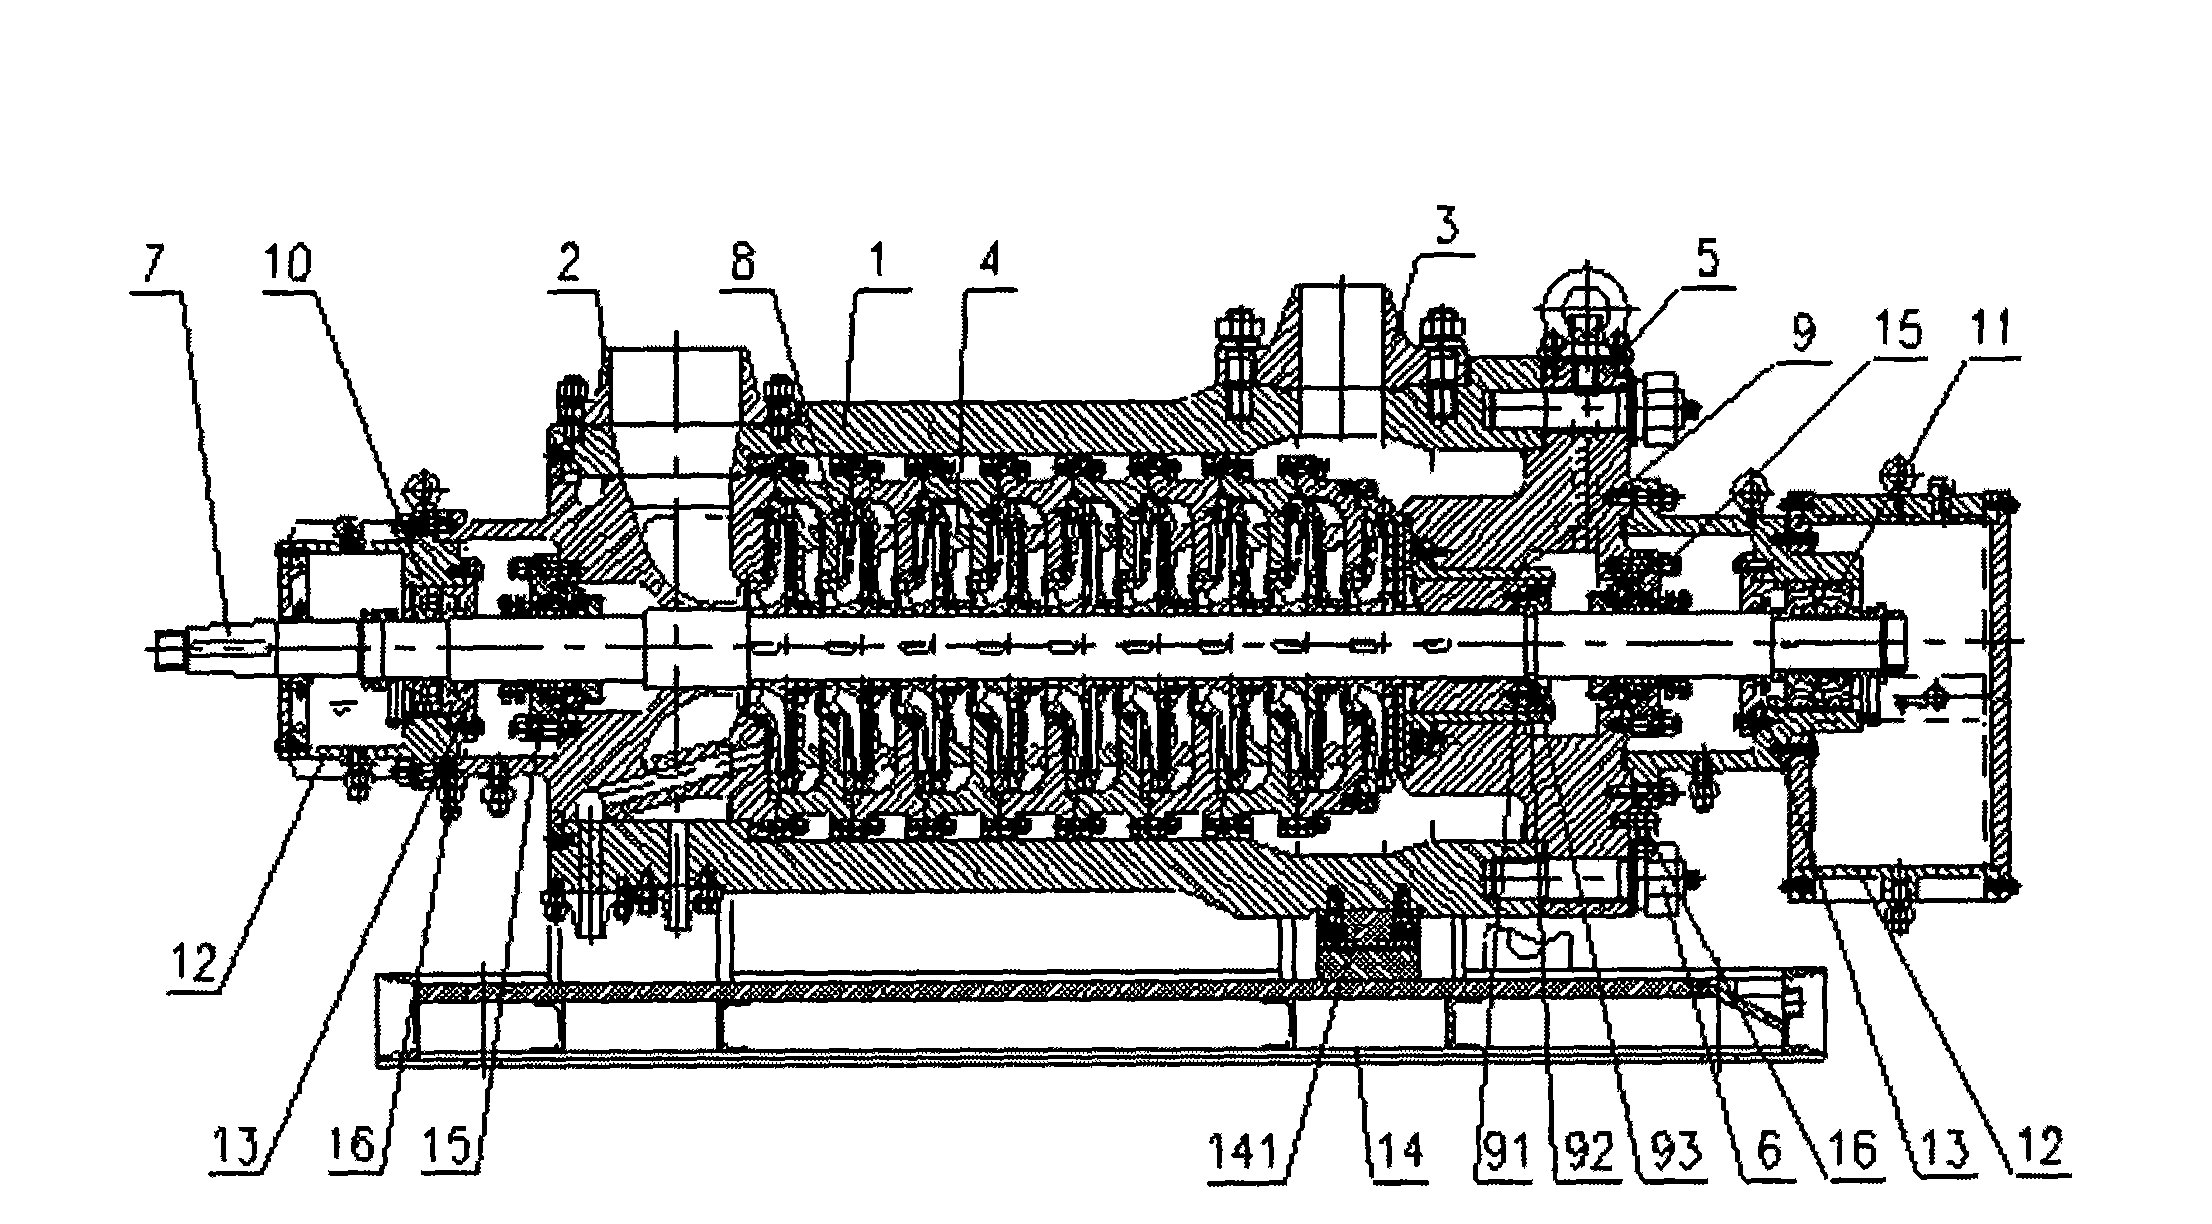 Auxiliary water supply electric pump in nuclear power plant